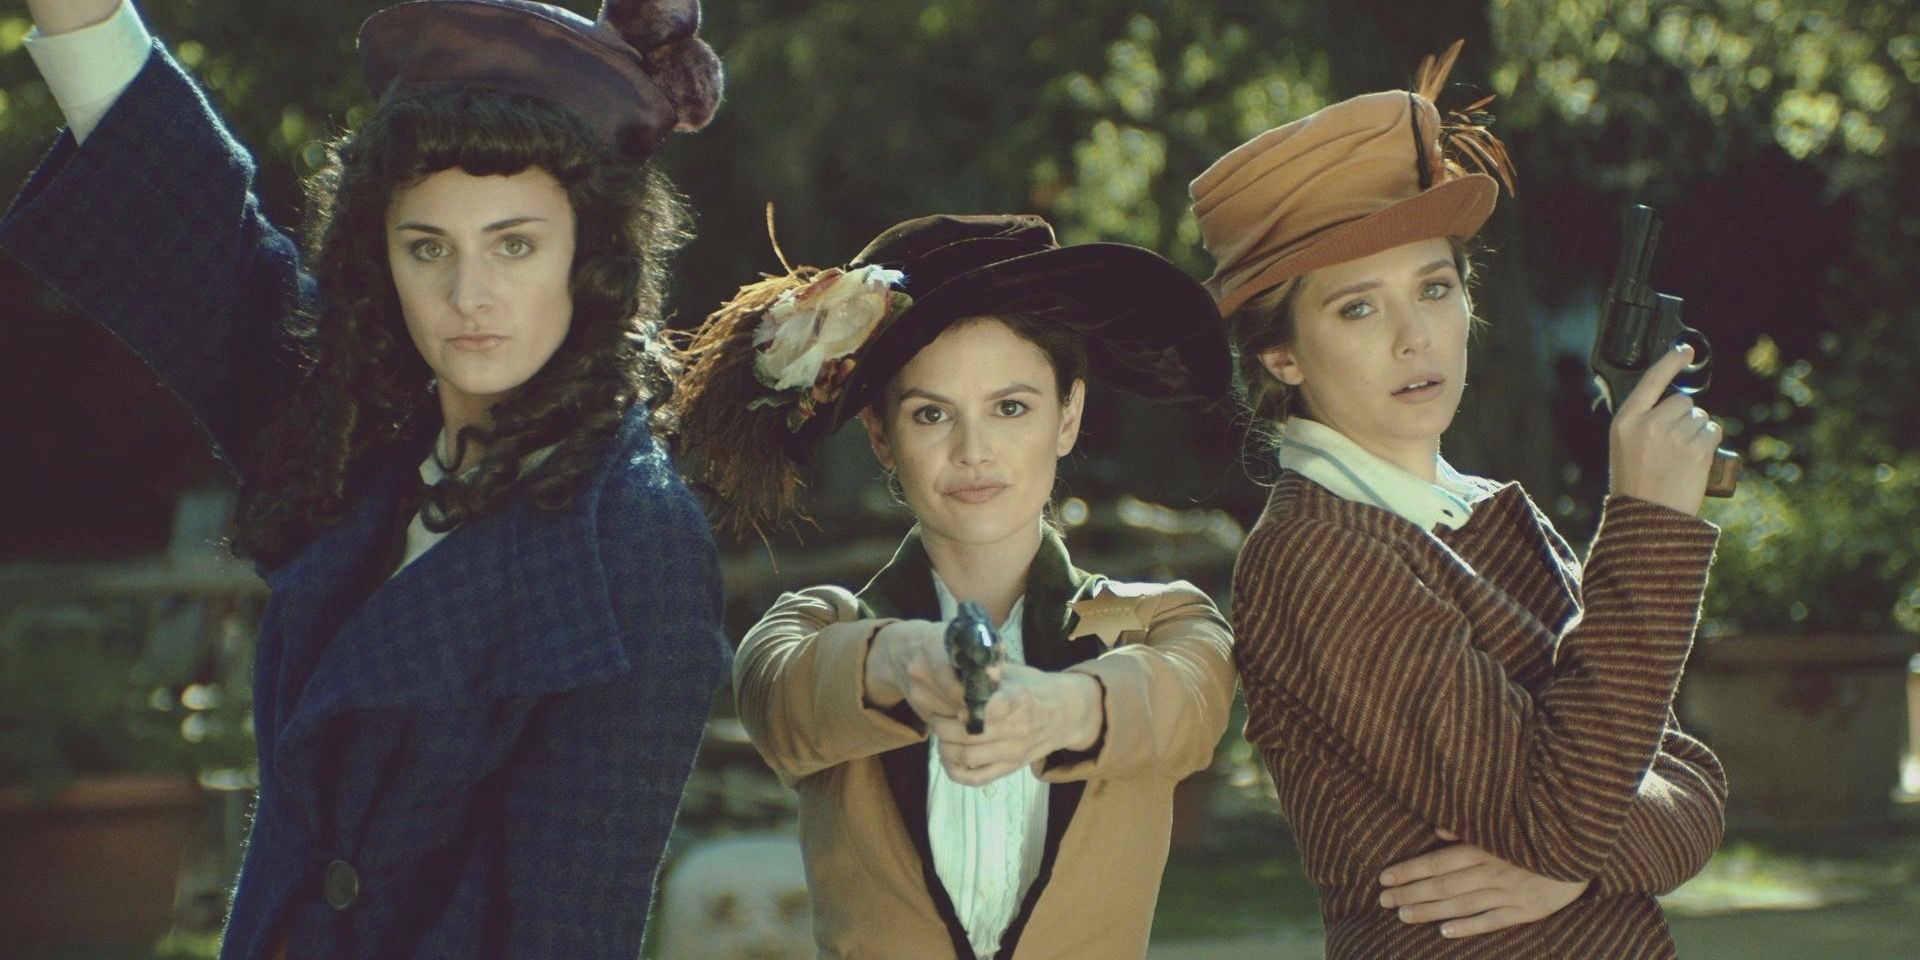 The Kopp sisters posing with their weapons in Drunk History.